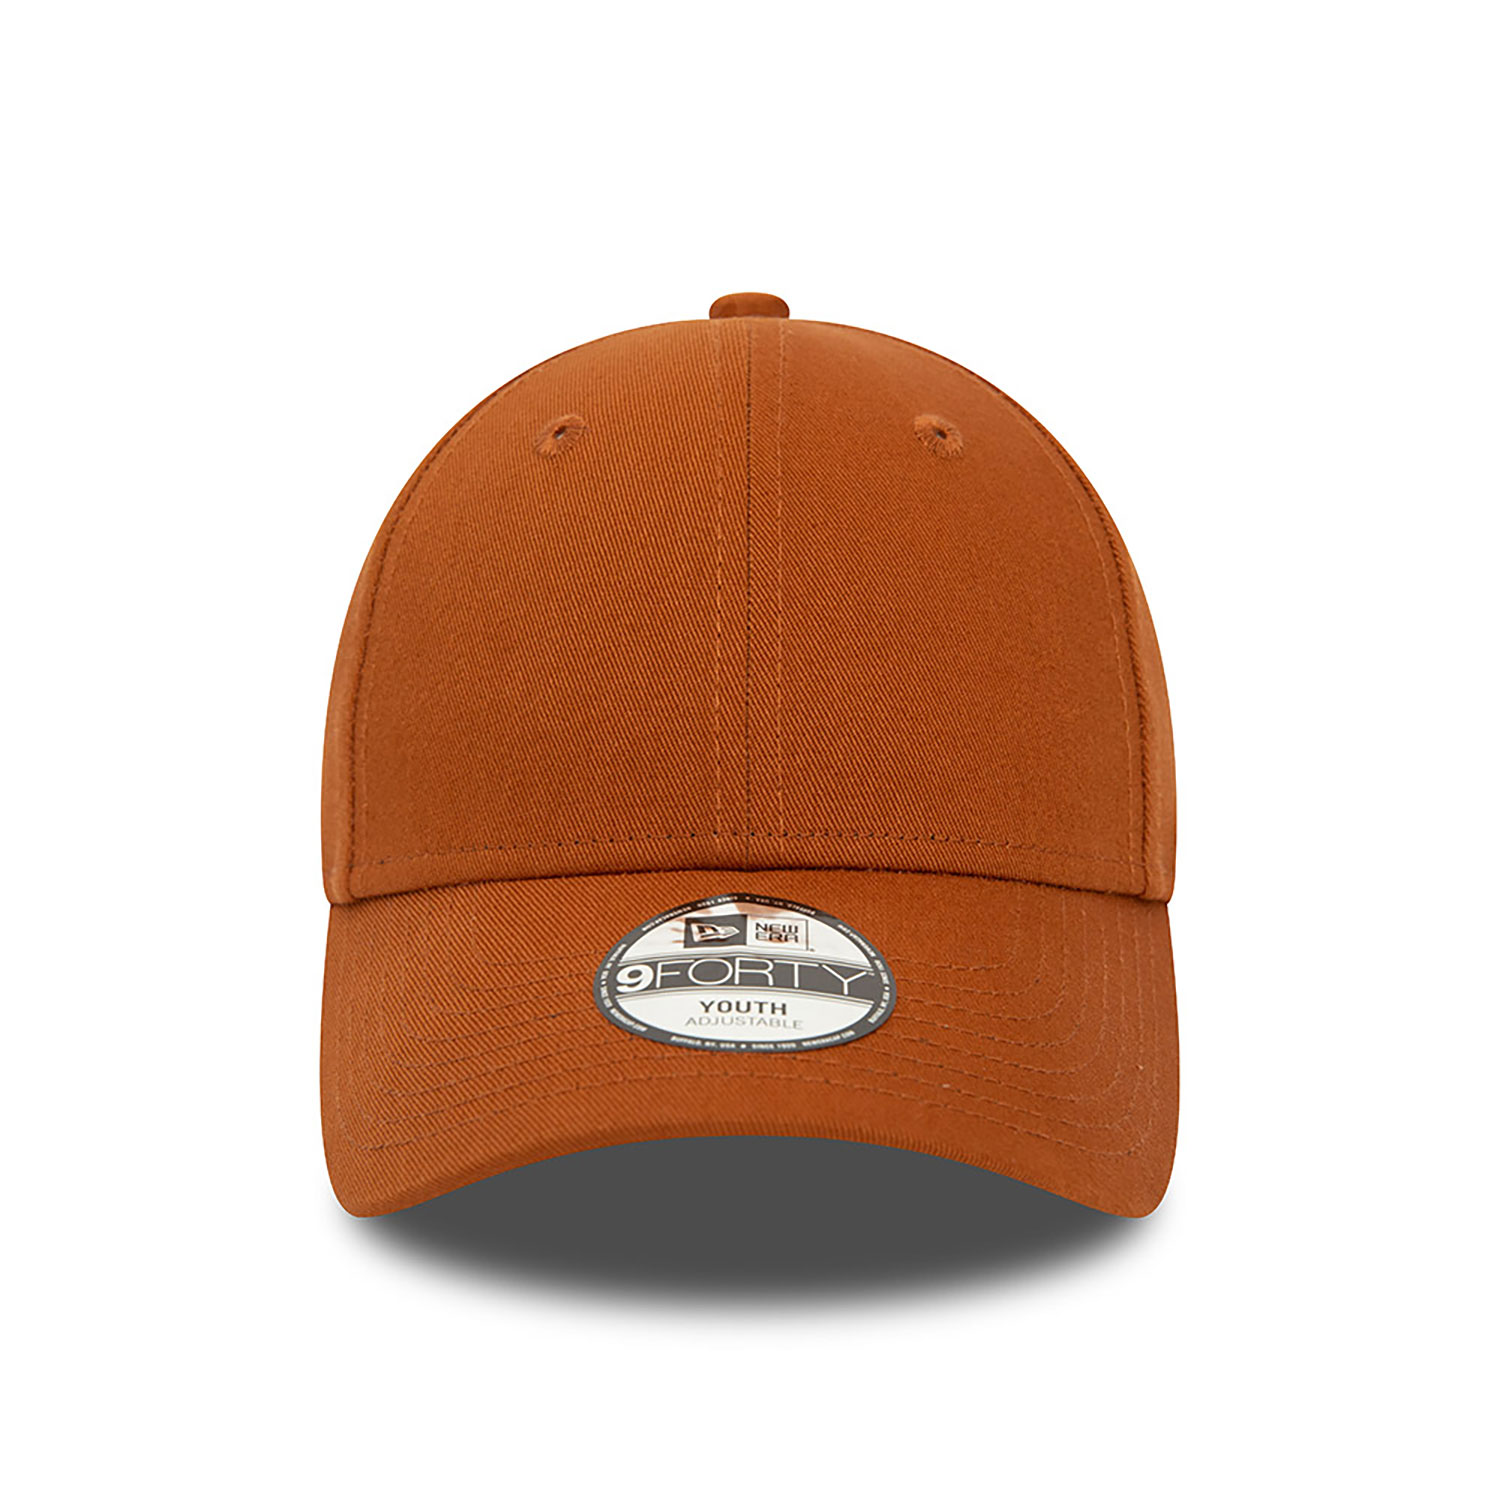 New Era Youth Essential Brown 9FORTY Cap